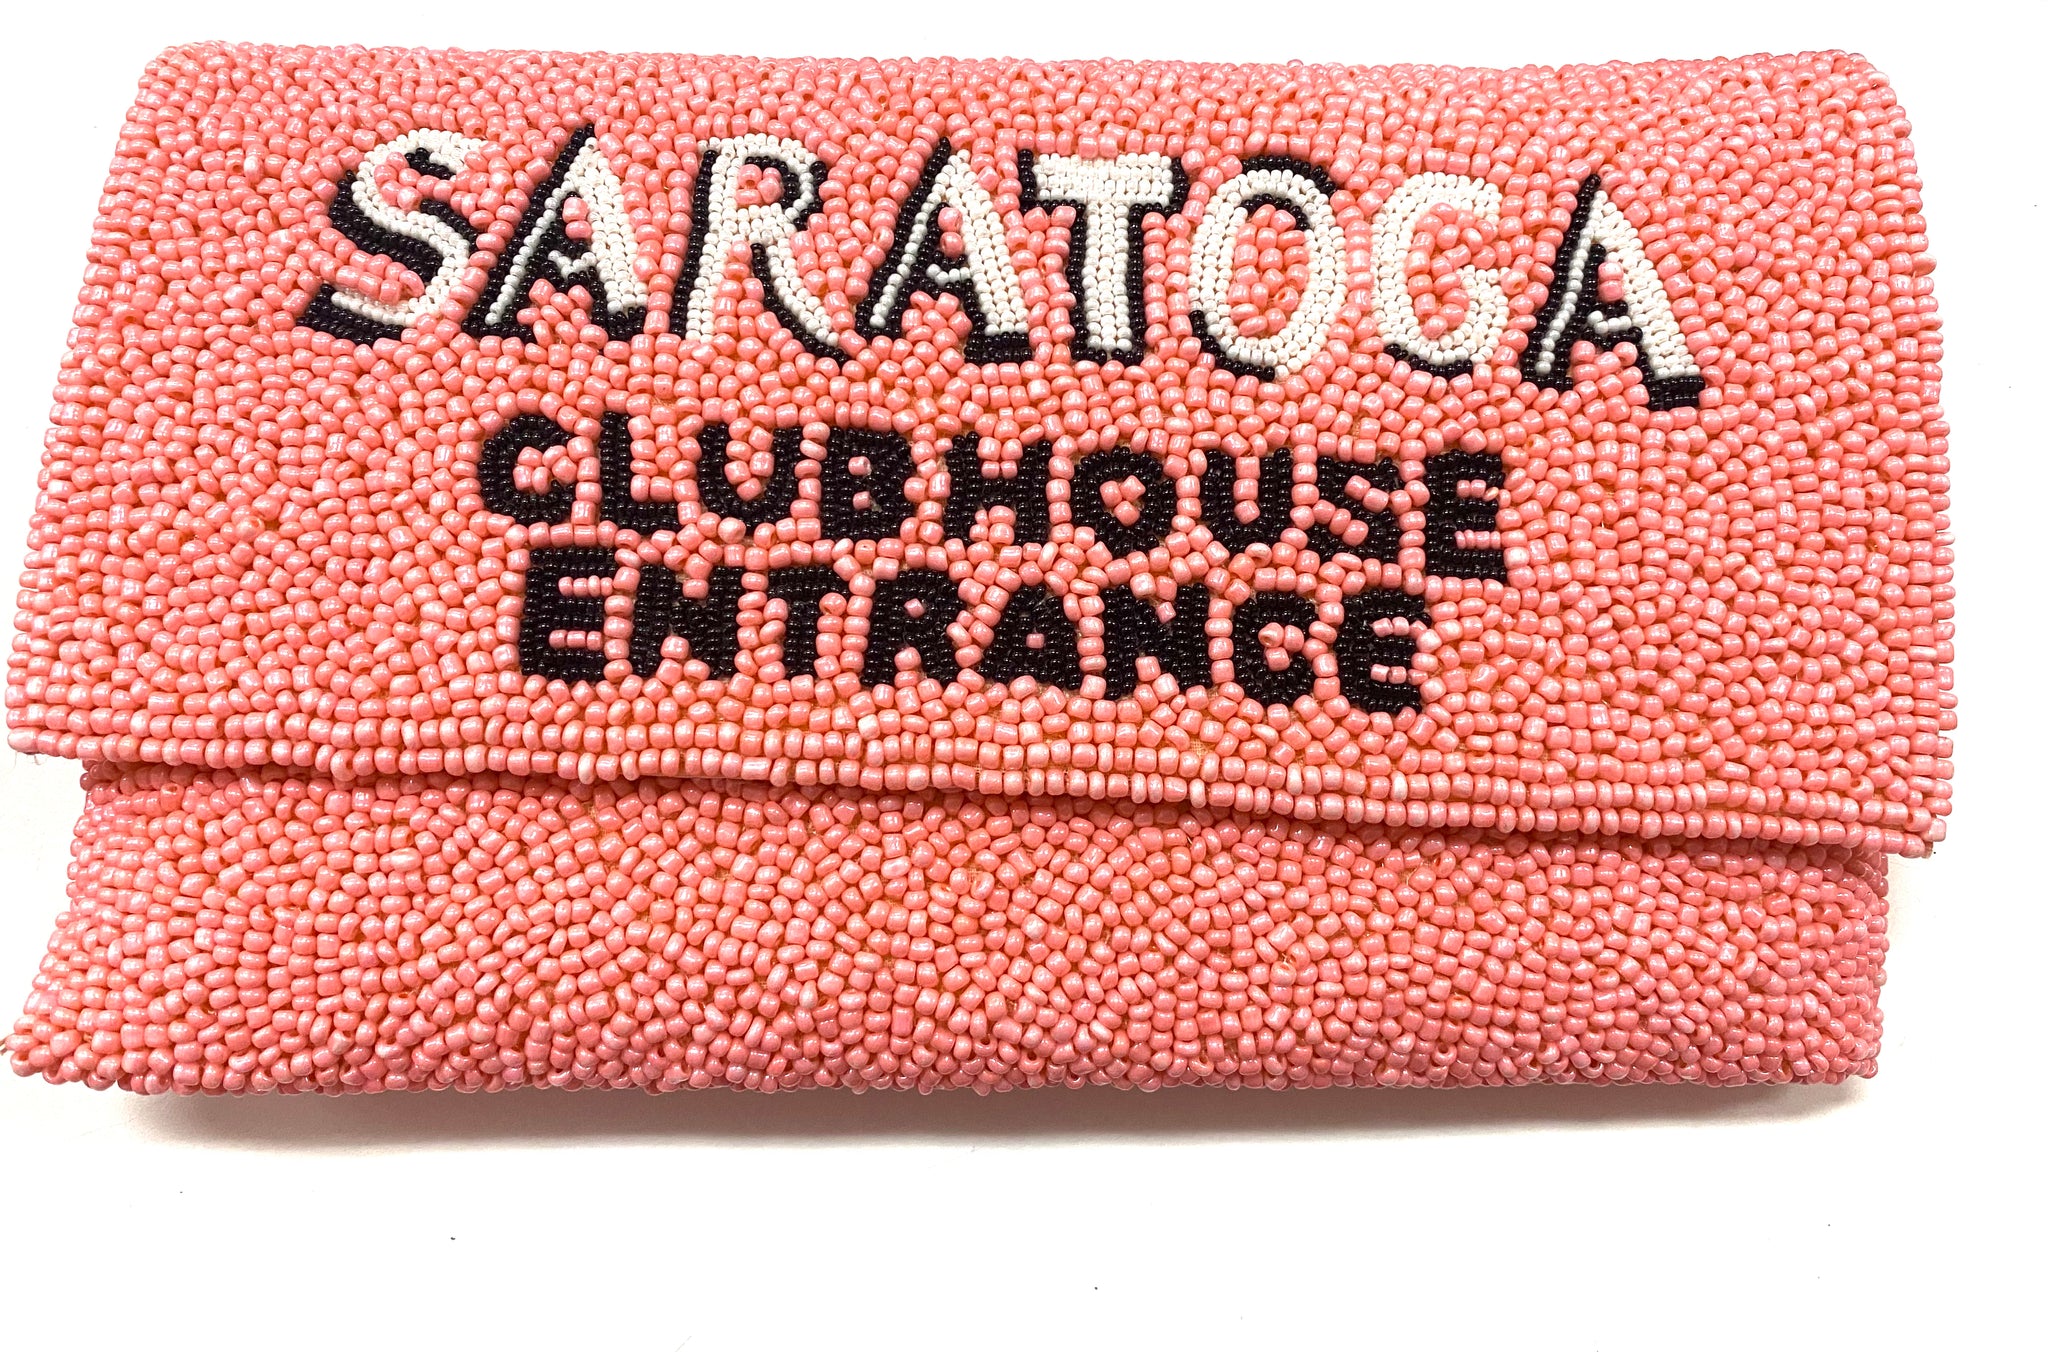 Beaded Saratoga Clubhouse Clutch 4 colors